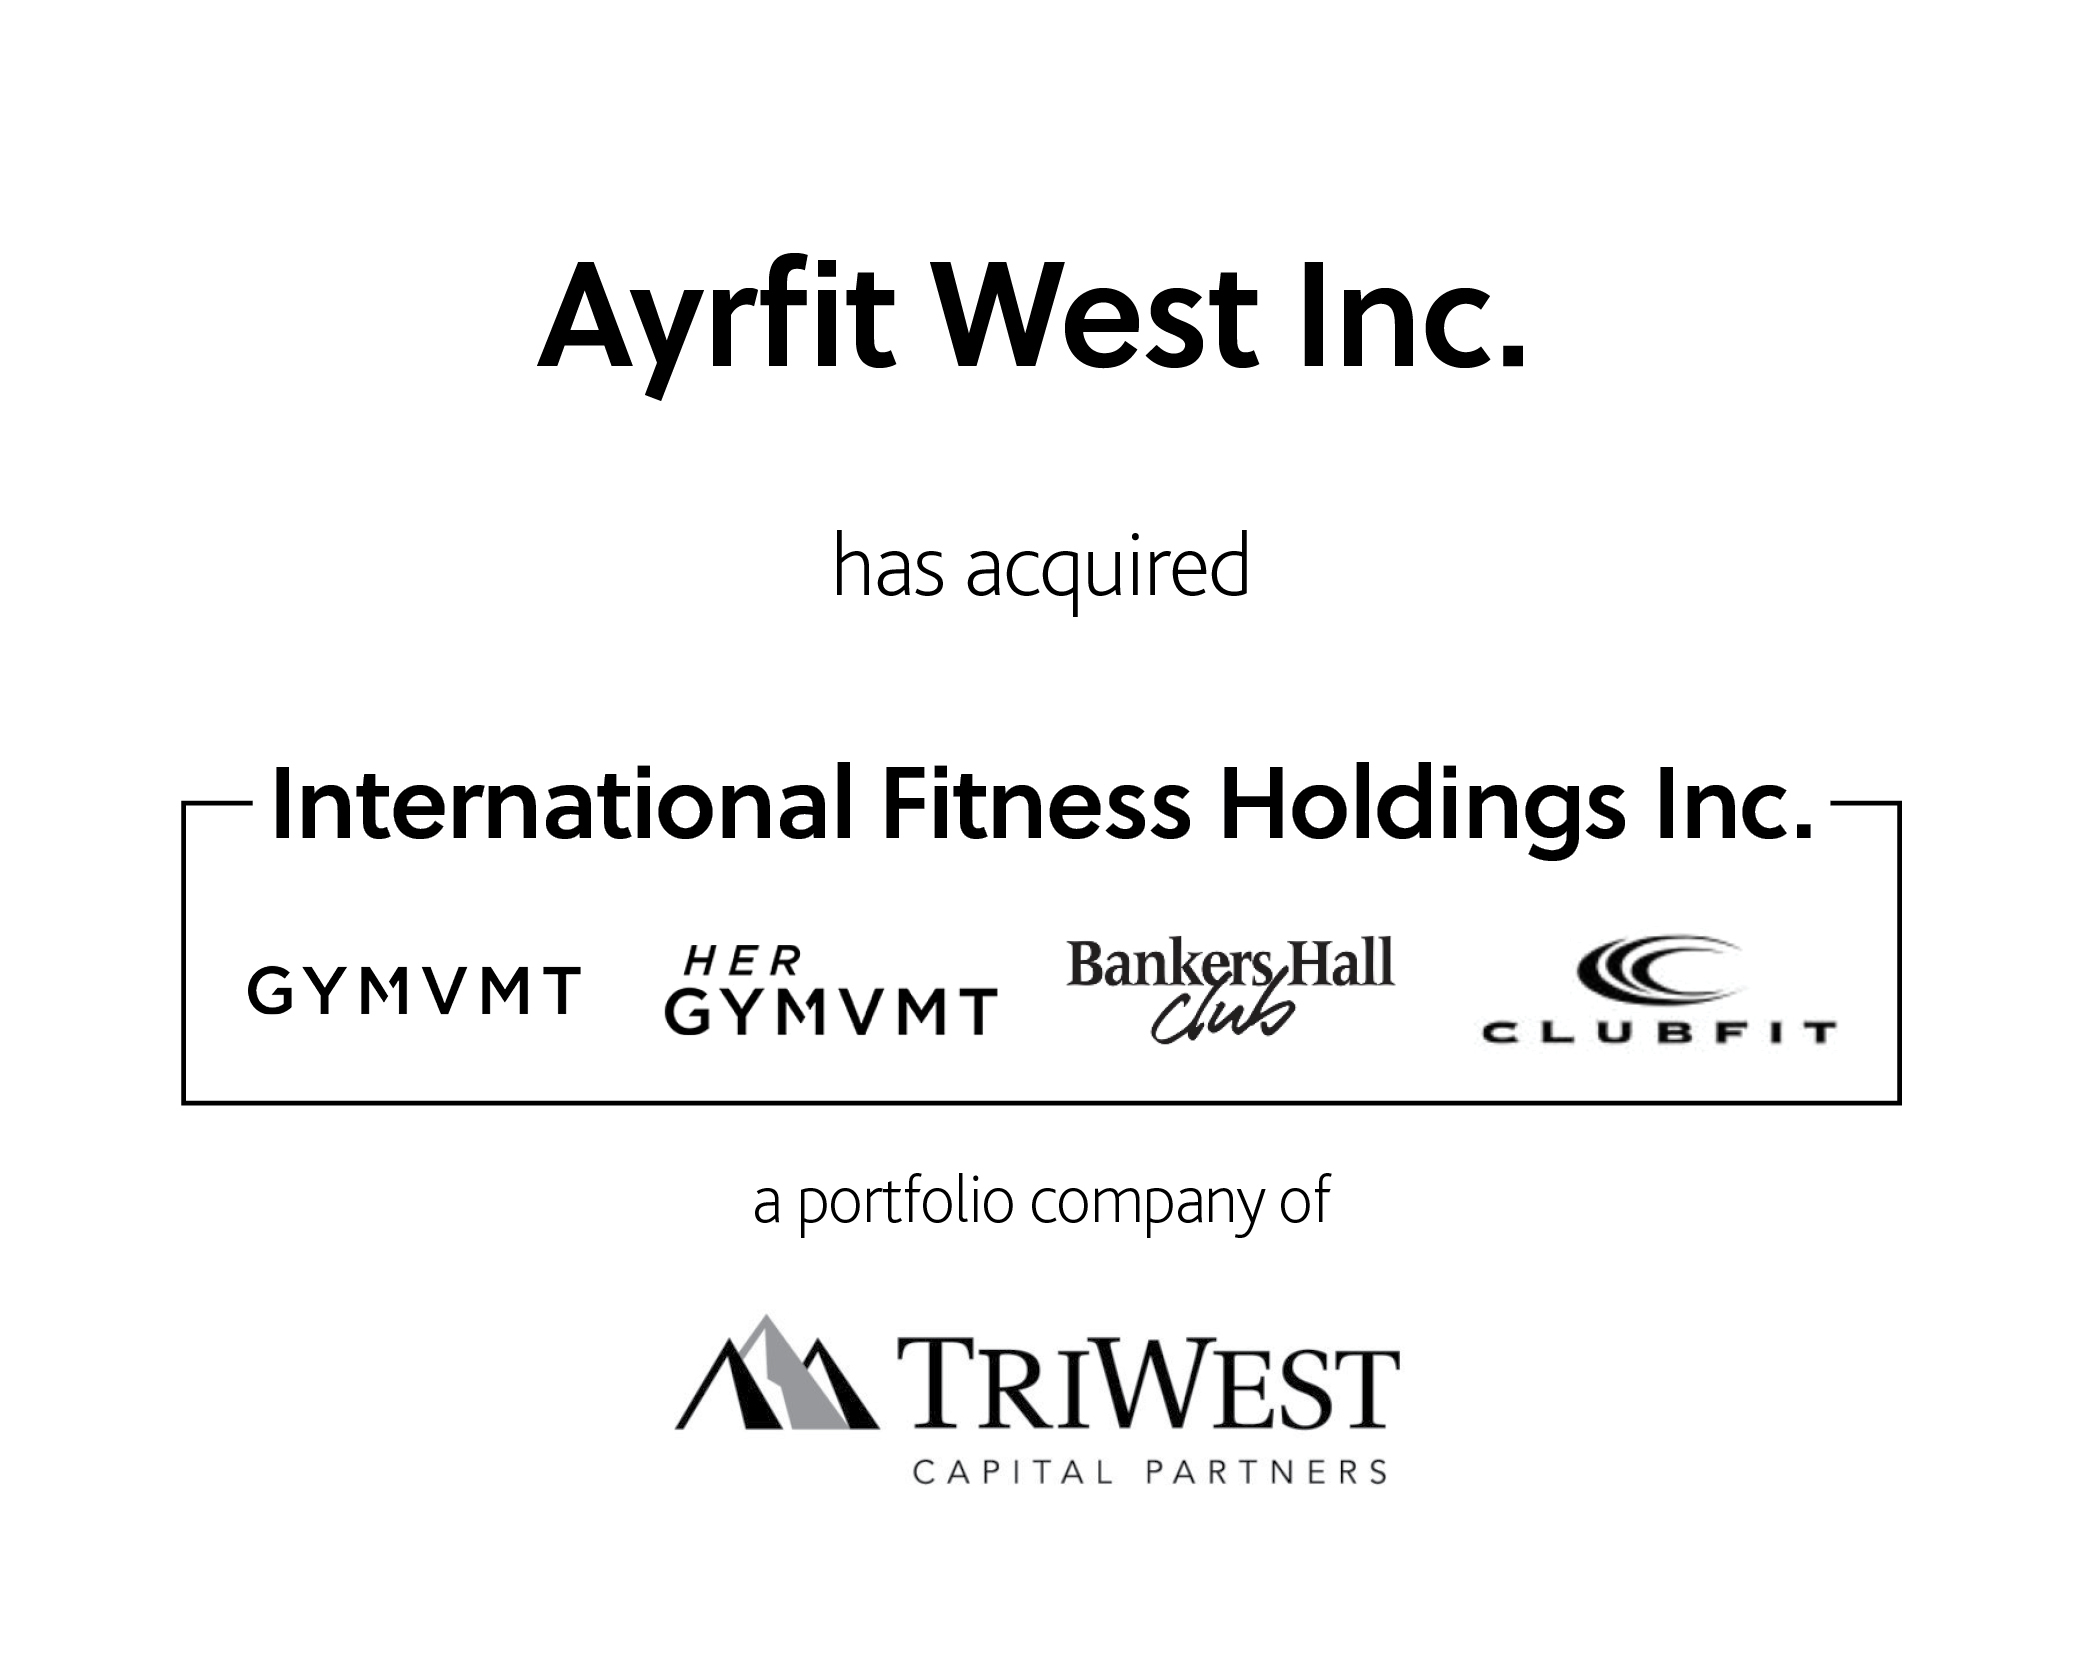 Ayrfit West Inc. has acquired International Fitness Holdings Inc., a portfolio company of TriWest Capital Partners